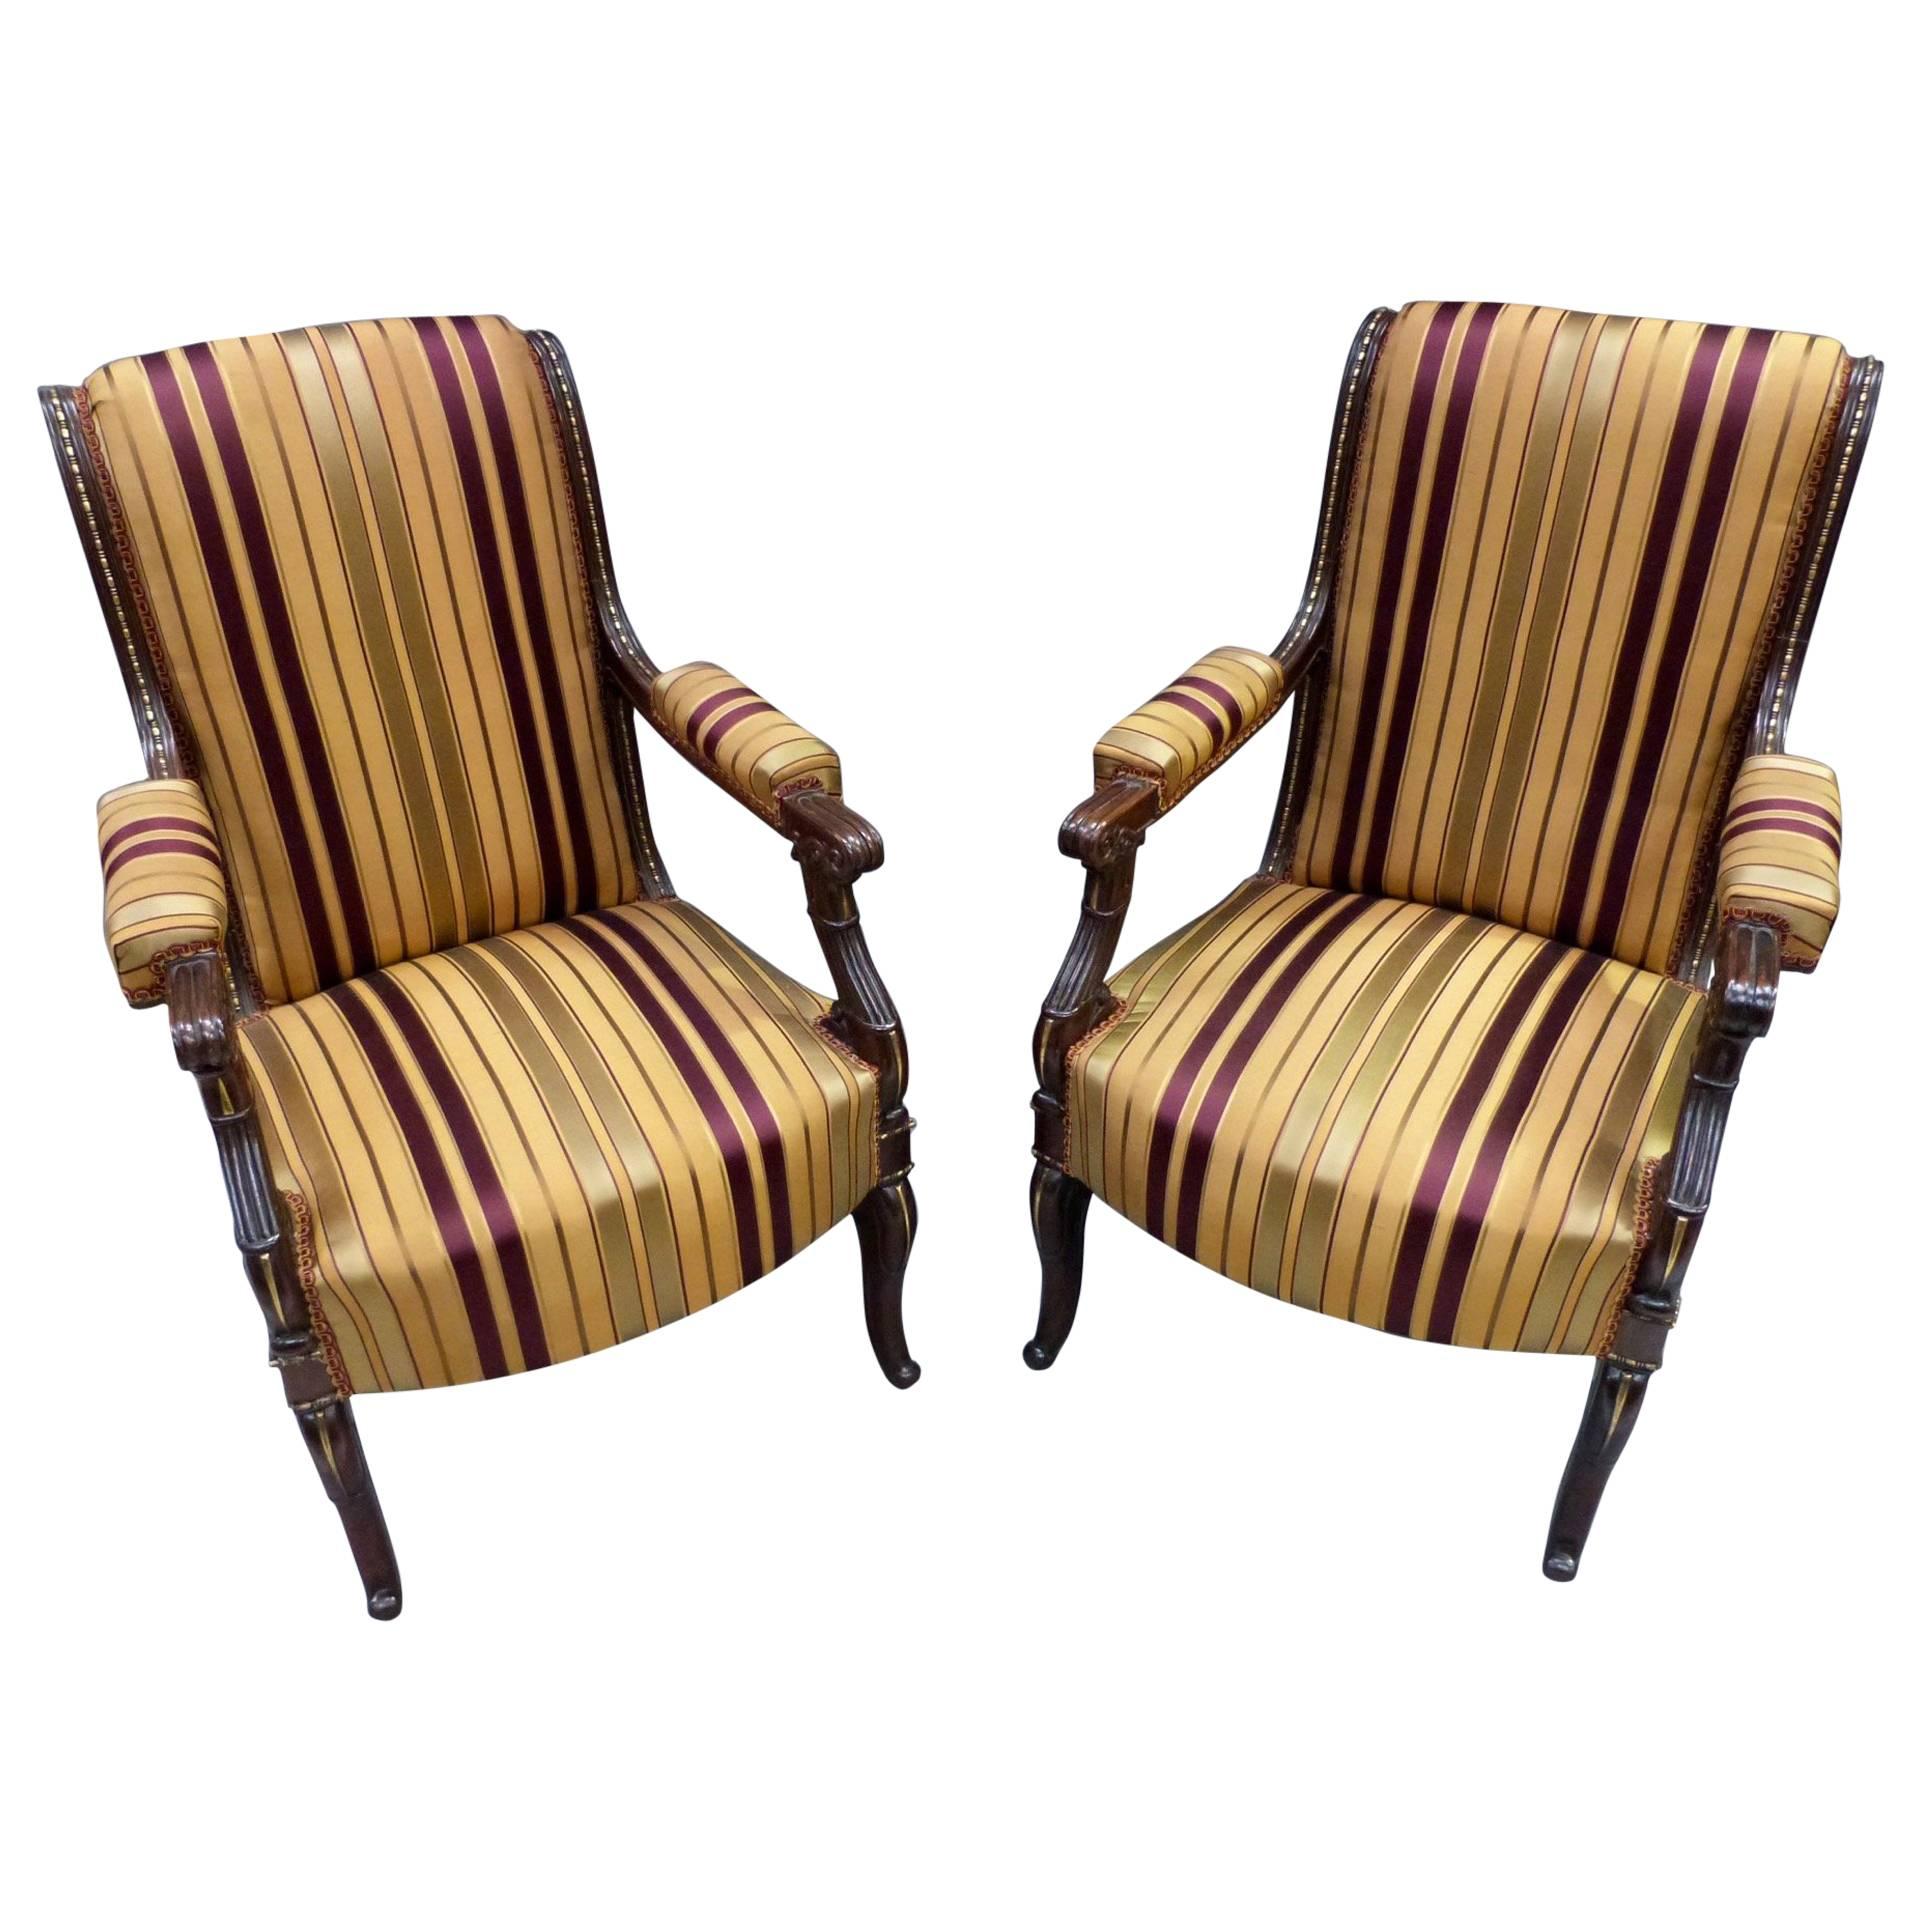 Pair of Early 19th Century French Empire Elbow Chairs For Sale